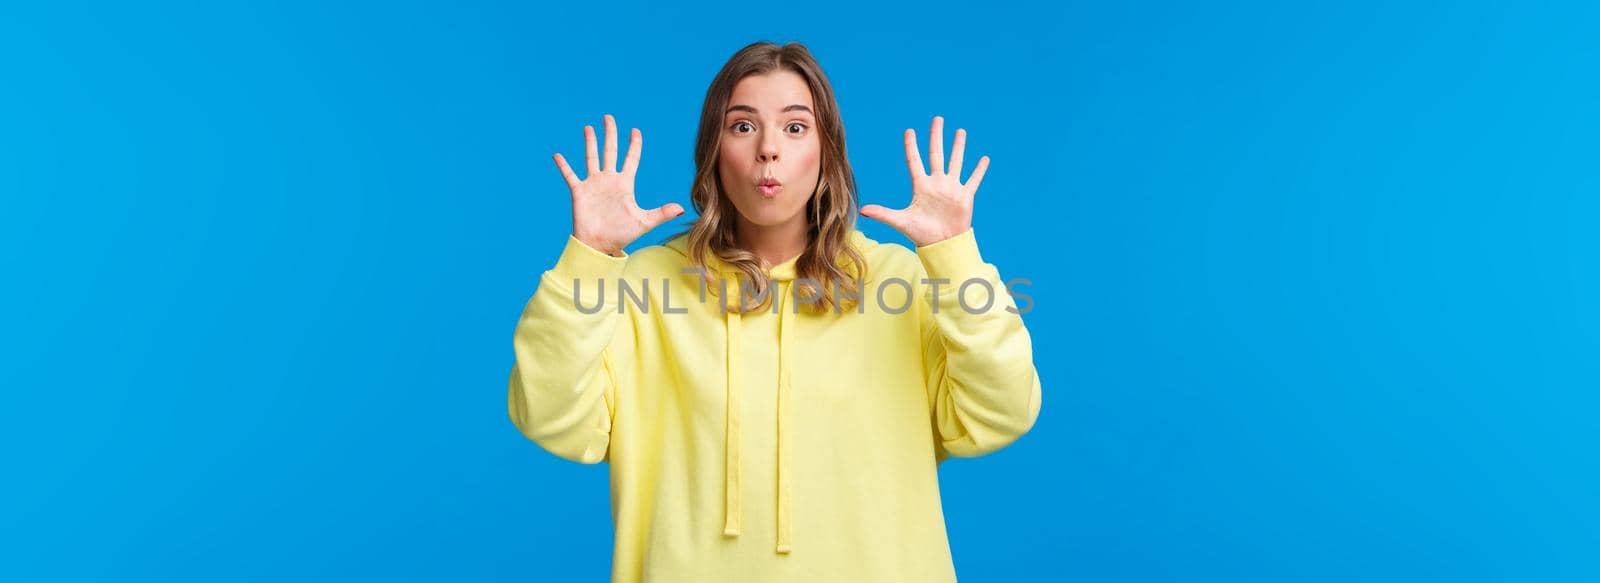 Imagine this. Excited and happy outgoing blond girl explain something and gesturing, holding hands near face, showing number ten, talking to camera passionatly describe plan, blue background.